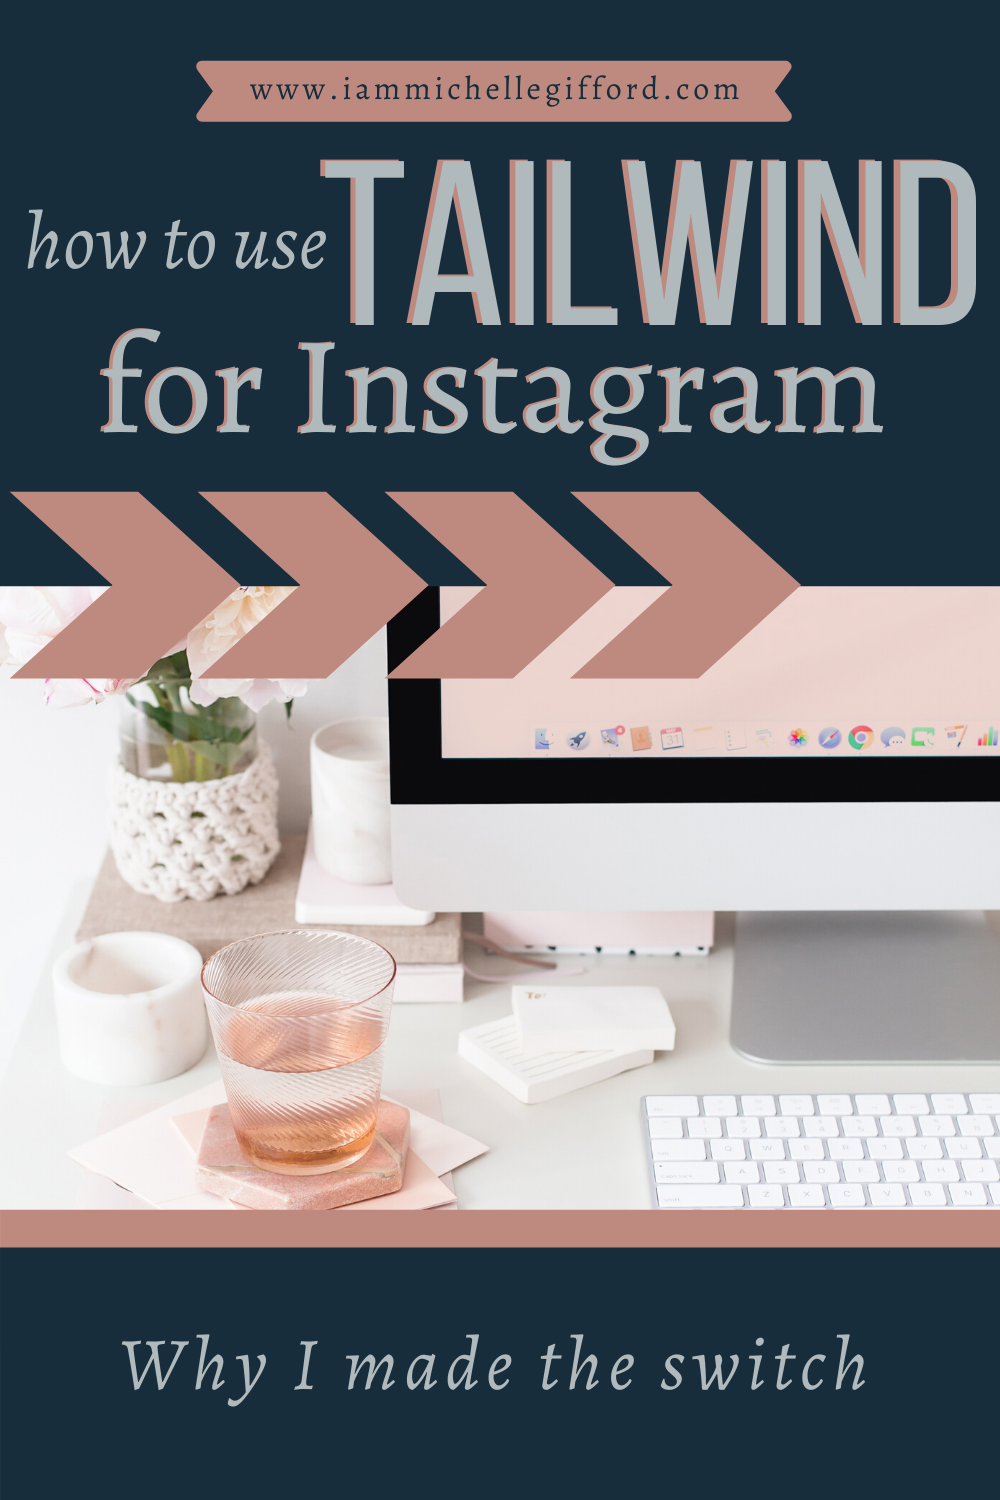 How to Use Tailwind for Instagram why I made the switch www.iammichellegifford.com